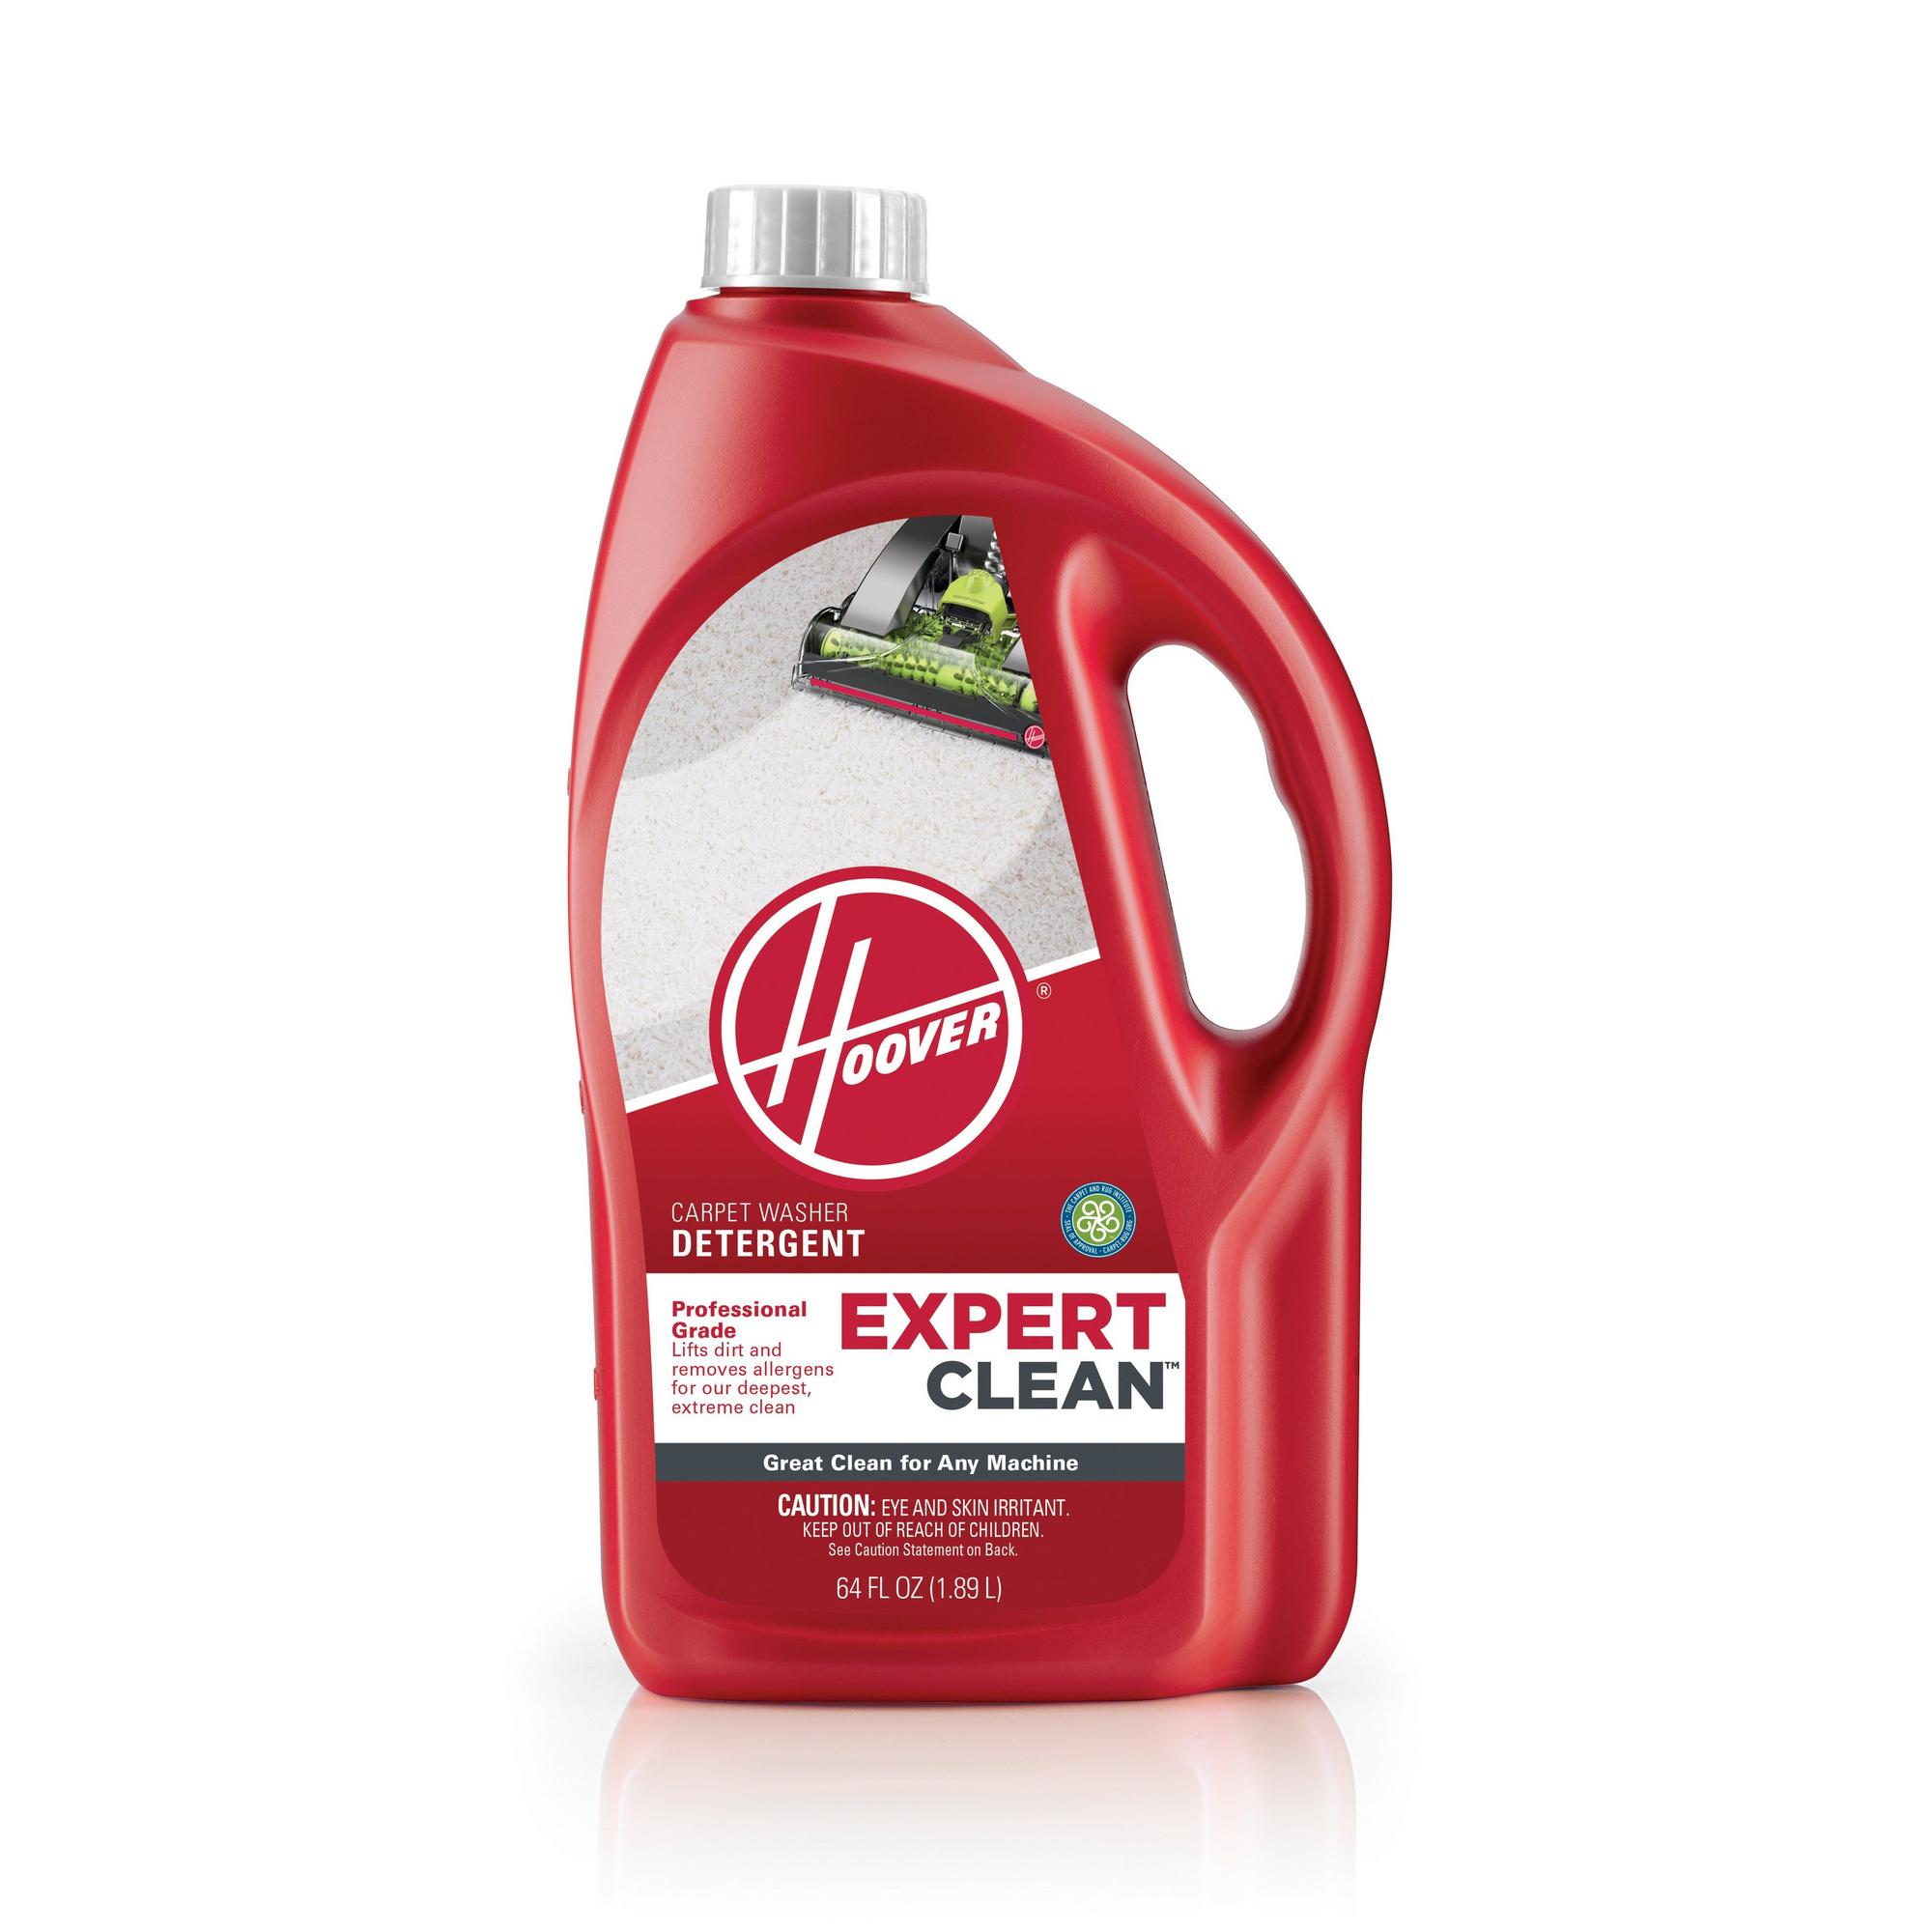 Carpet & Upholstery Cleaner – Wizards Products - All rights